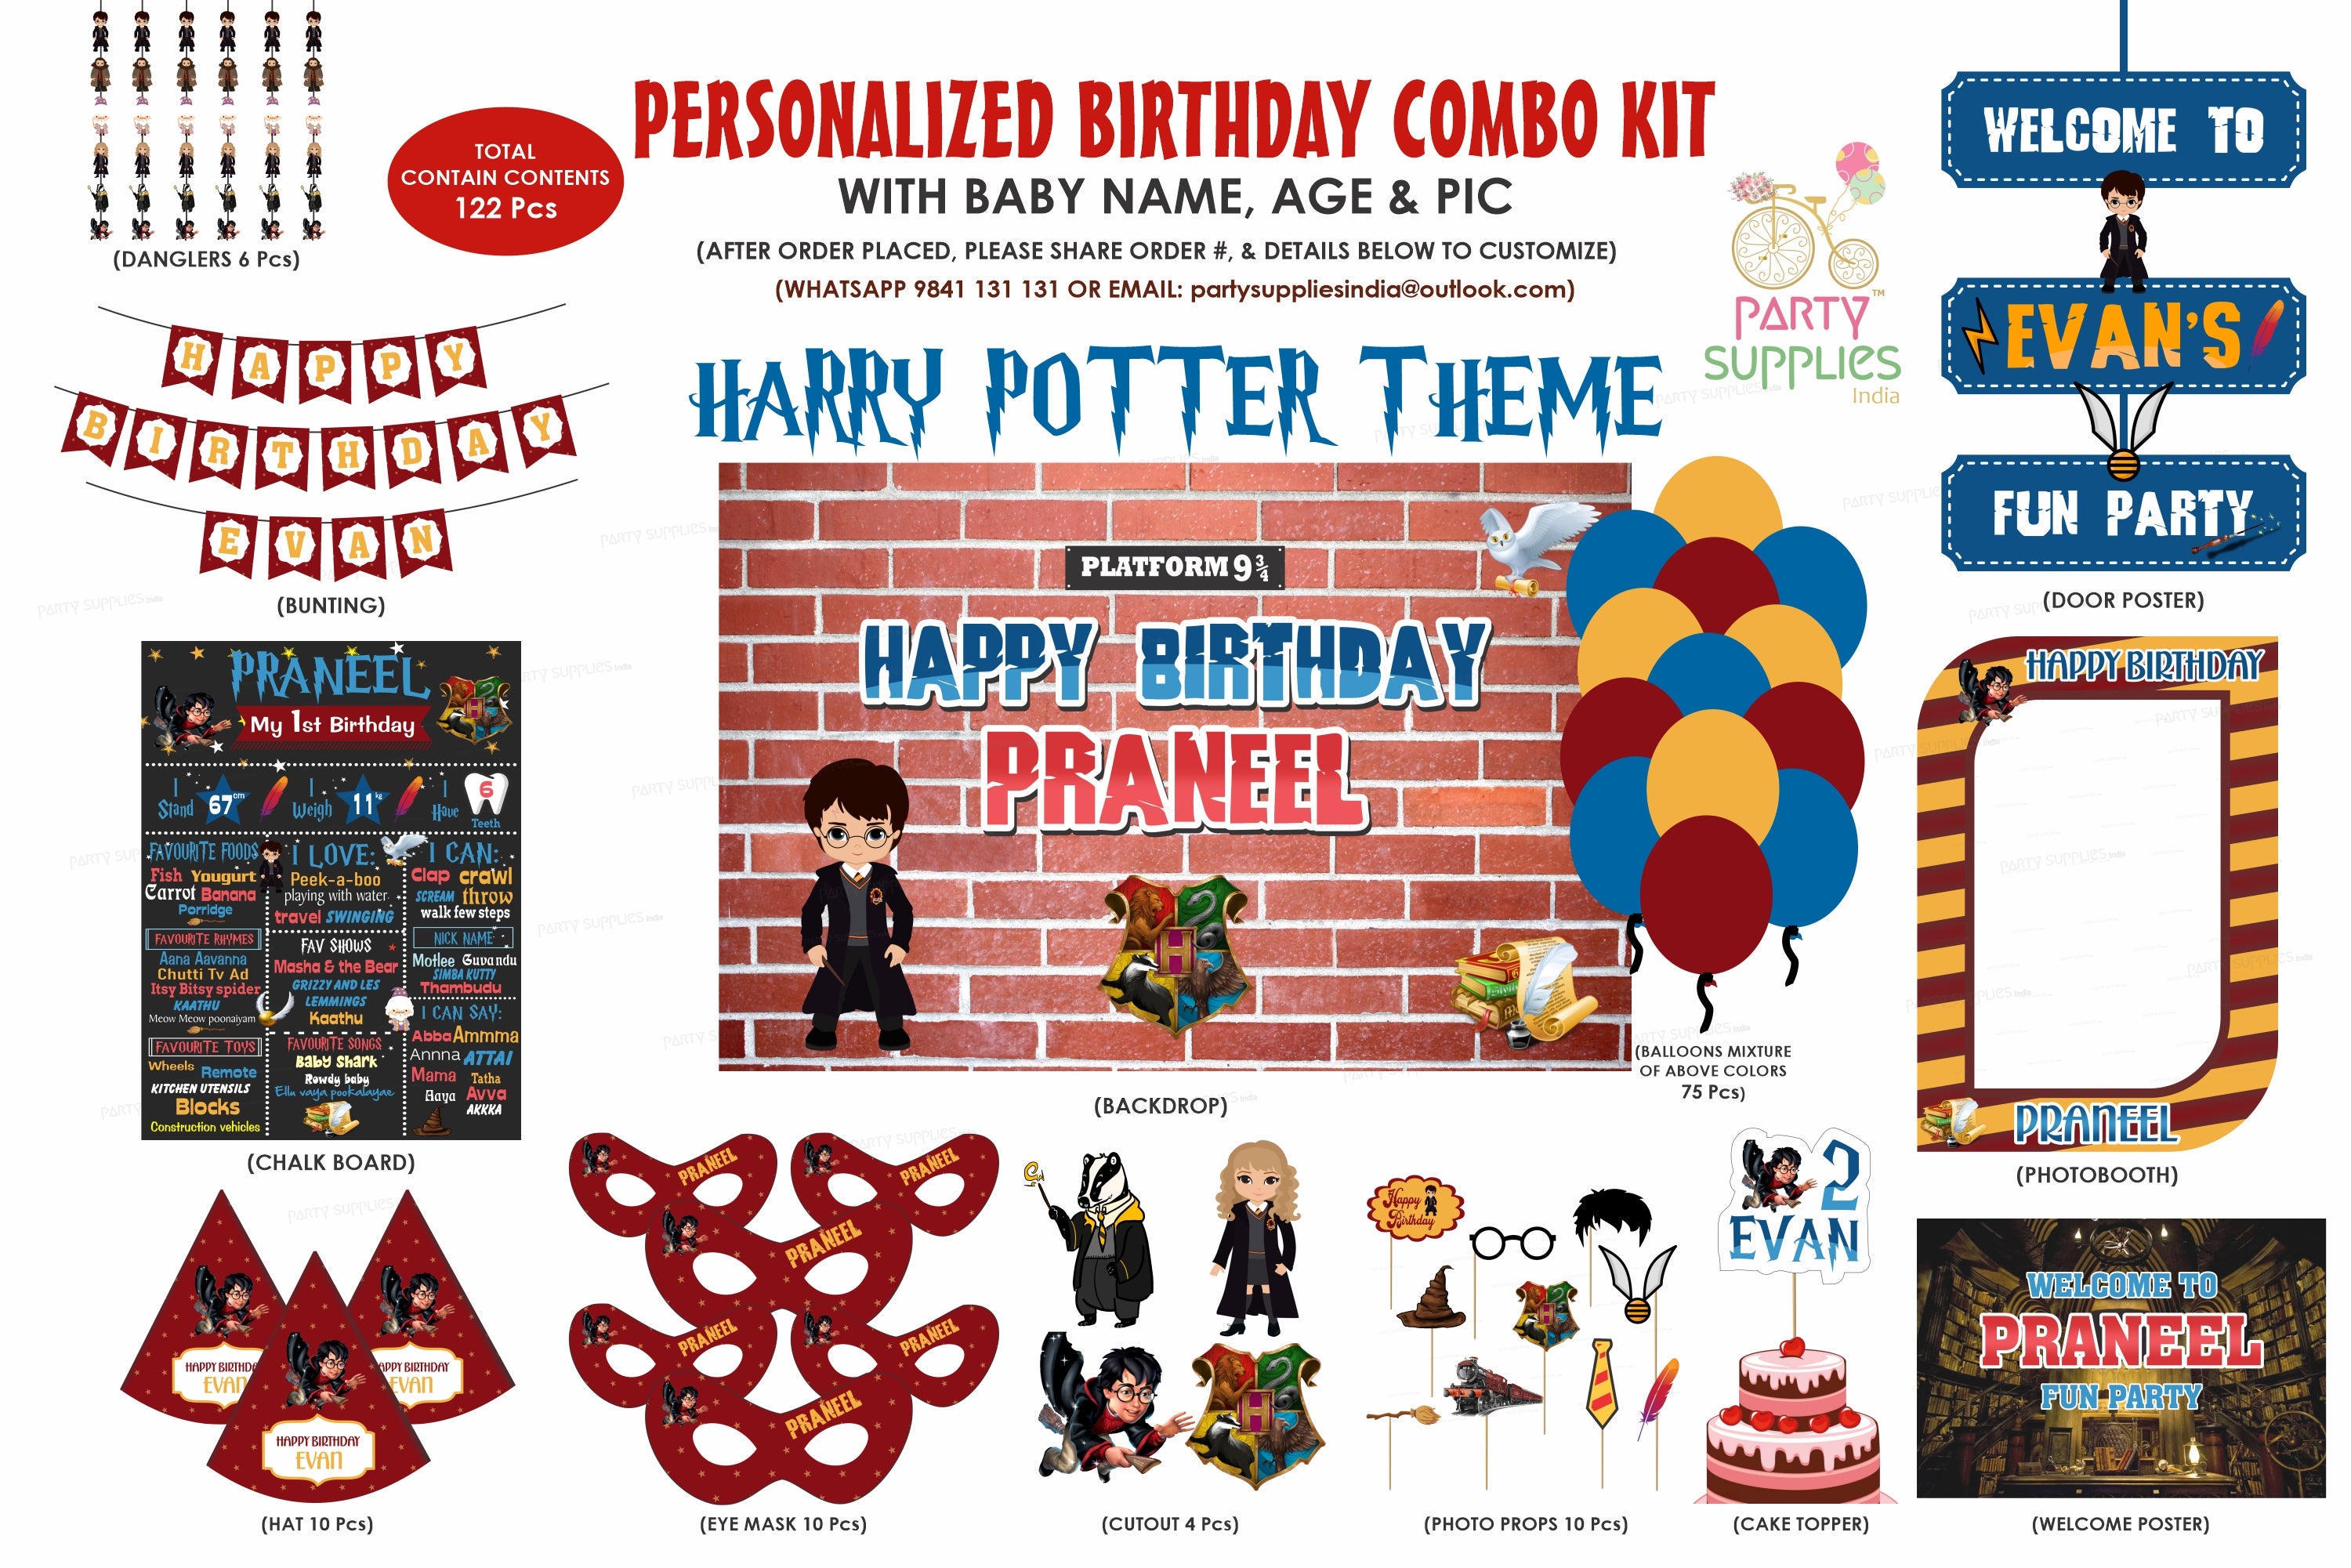 Harry Potter Theme Classic Kit  Personalized Birthday Party Supplies –  Party Supplies India